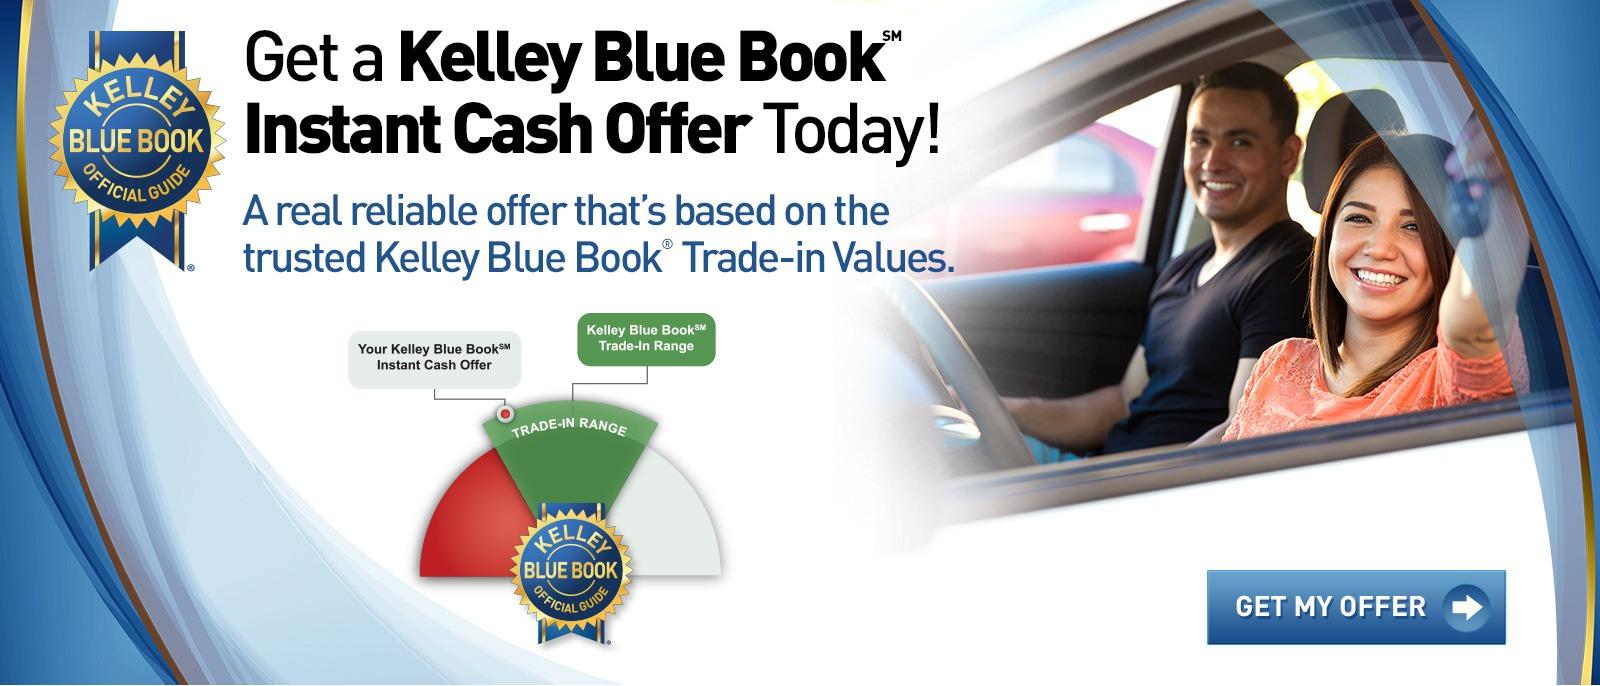 Get a Kelley Blue Book Instant Cash Offer today!
A real reliable offer that's based on the trusted Kelley Blue Book Trade-in Values.
Get my Offer!